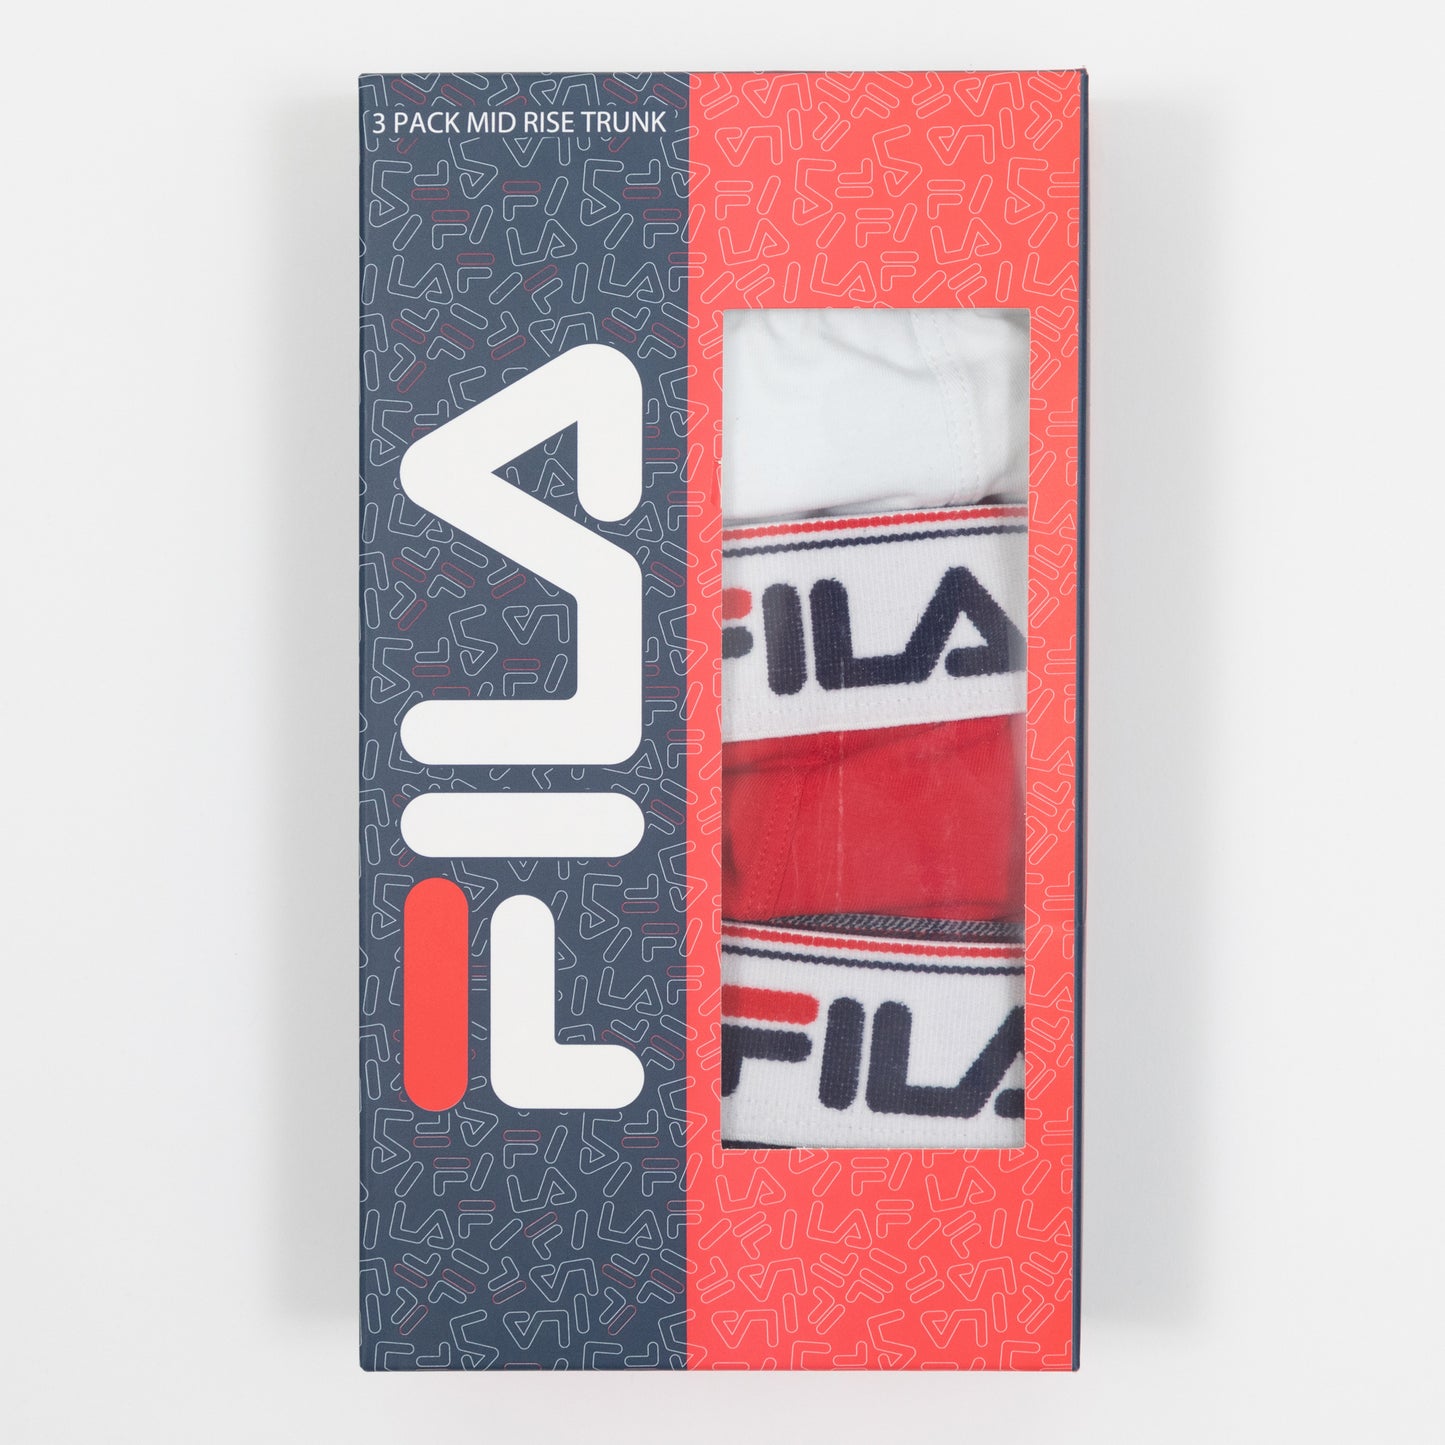 FILA Tristan 3 Pack Mid Rise Trunk Boxers in NAVY, WHITE & RED